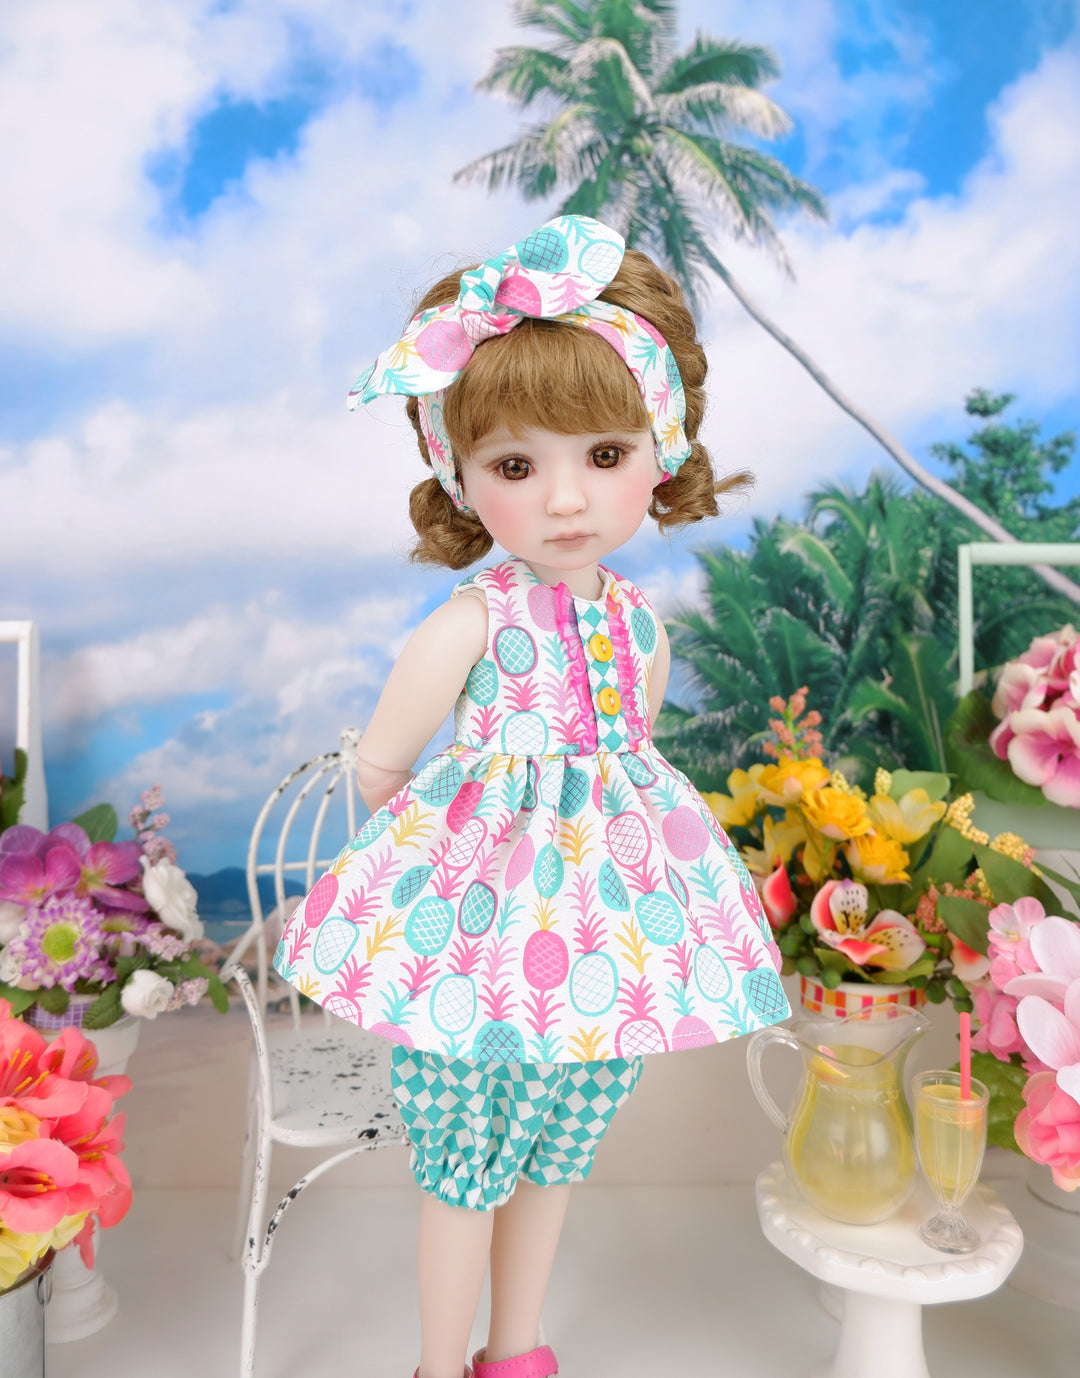 Petite Pineapple - top & bloomers with shoes for Ruby Red Fashion Friends doll